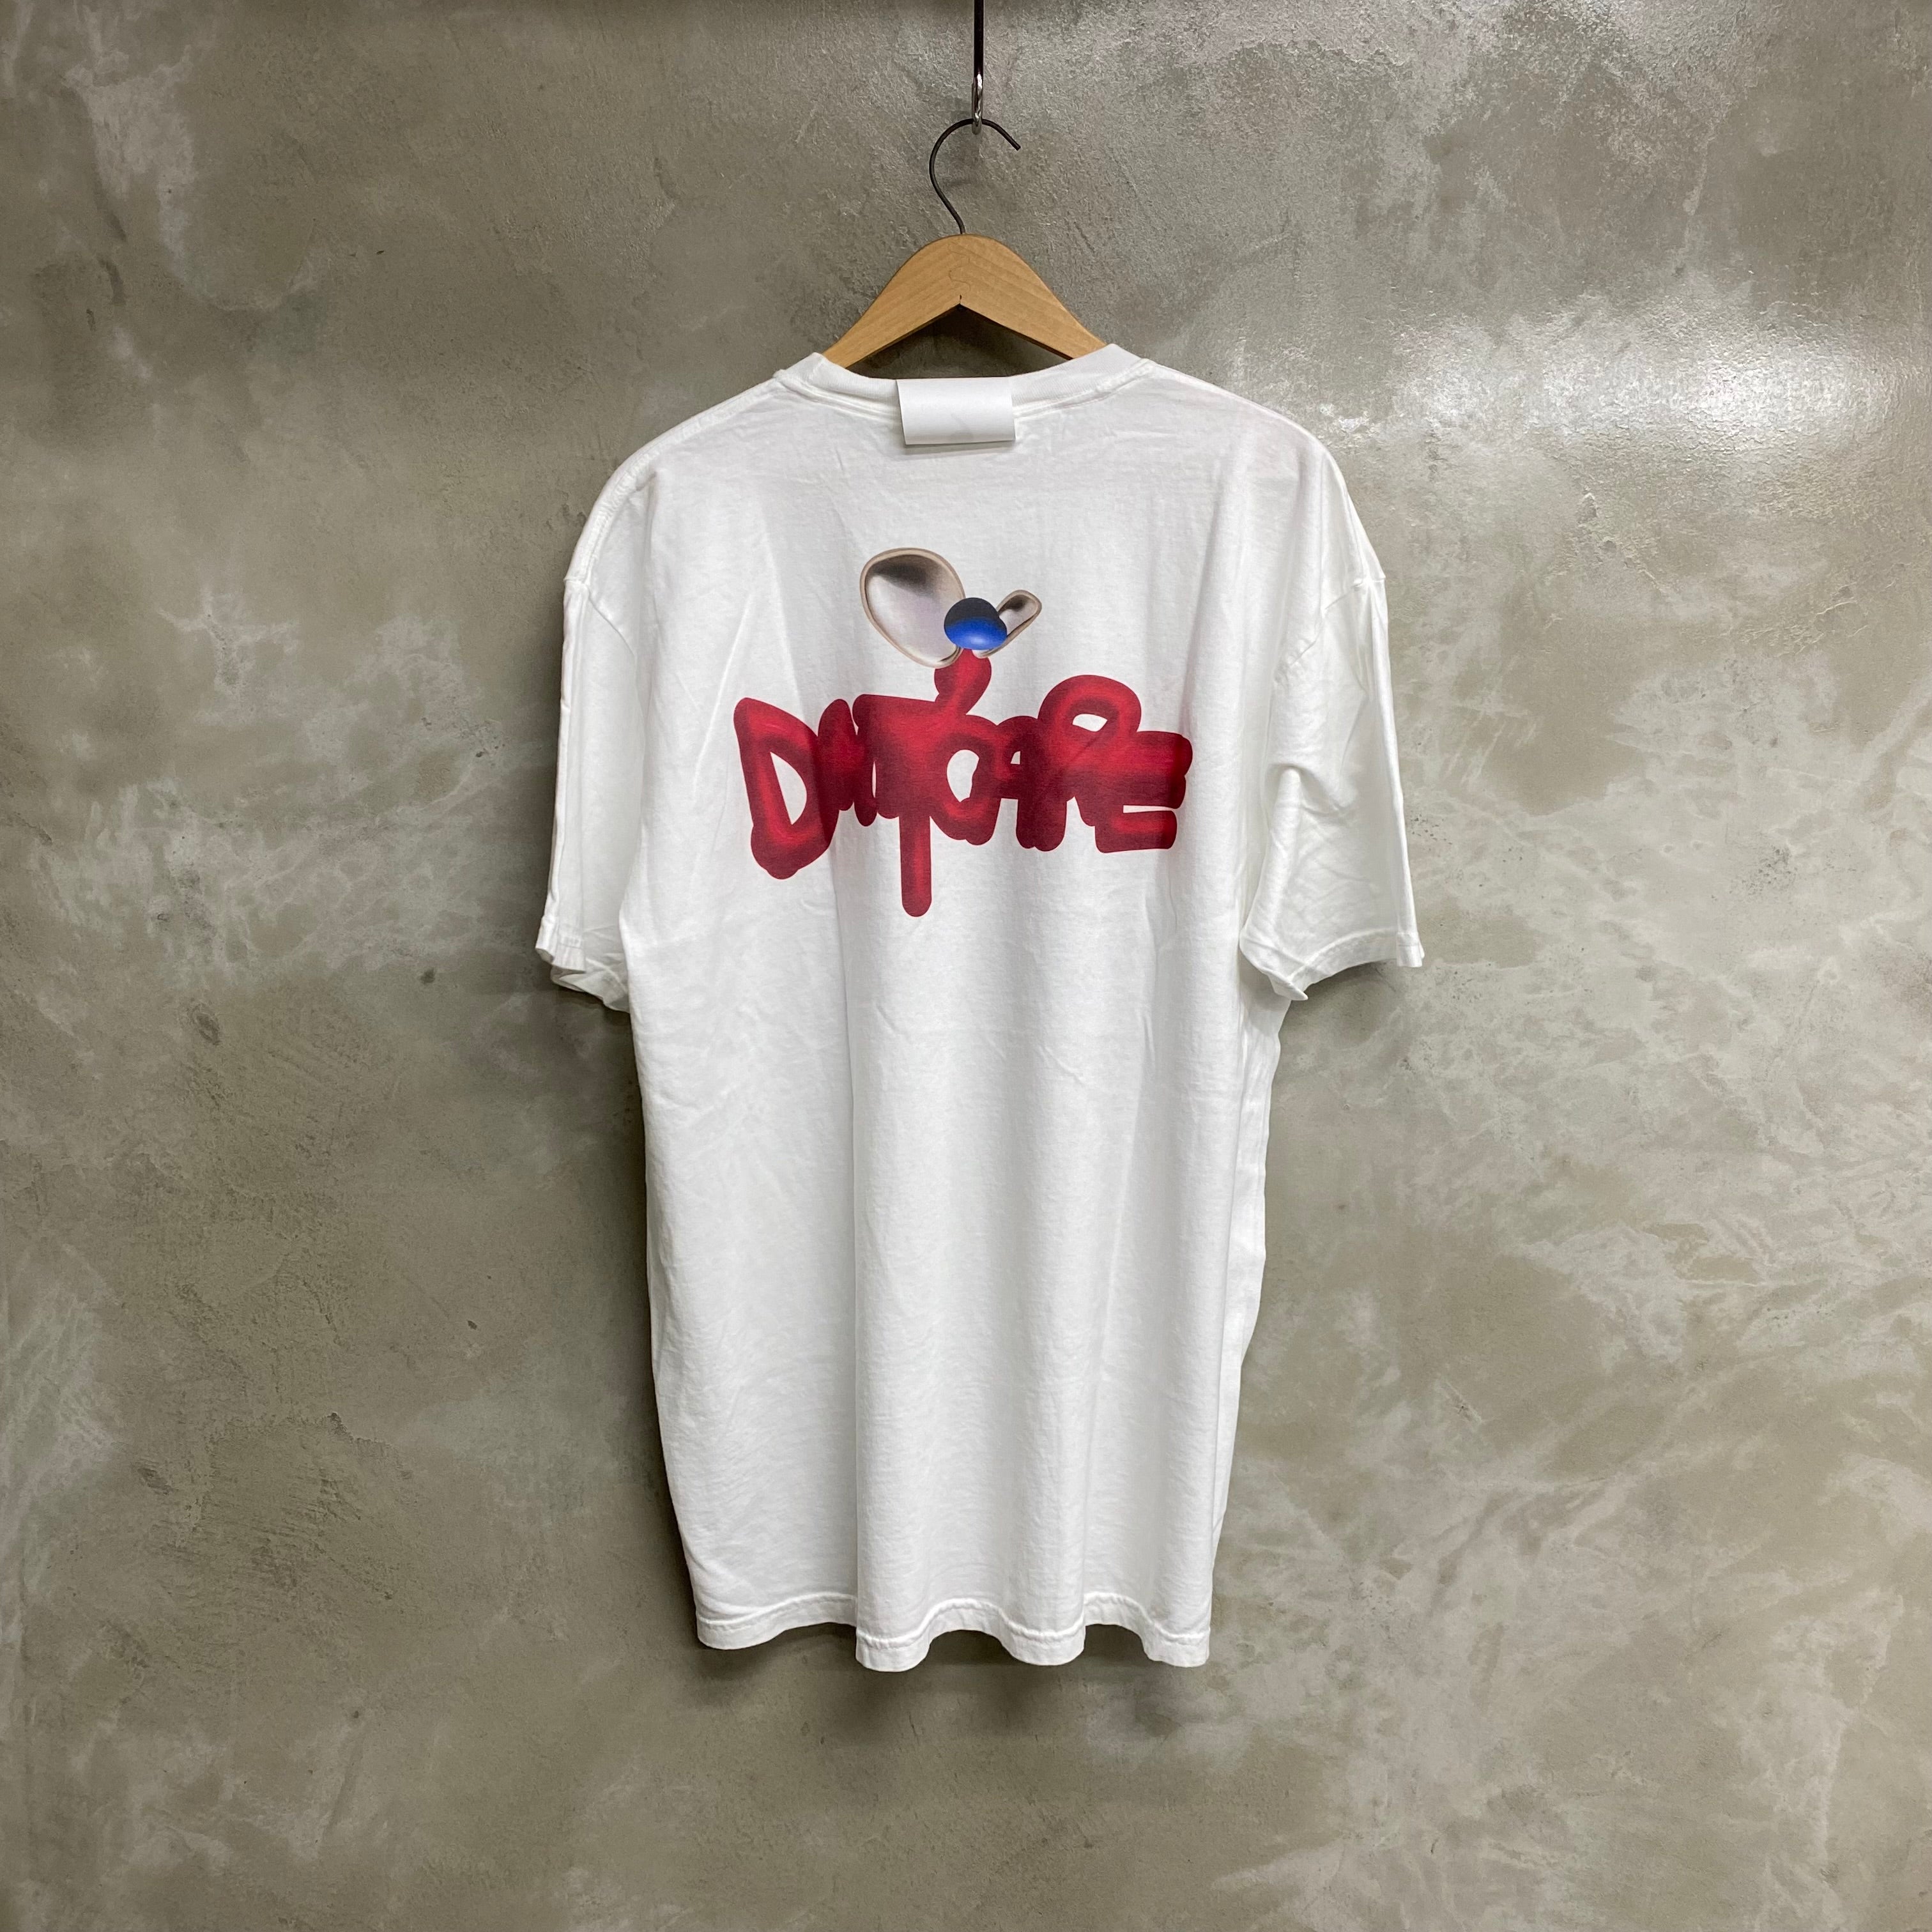 DON'T CARE SHORT SLEEVE T-SHIRTS " DC-GT006 ” / DON'T CARE